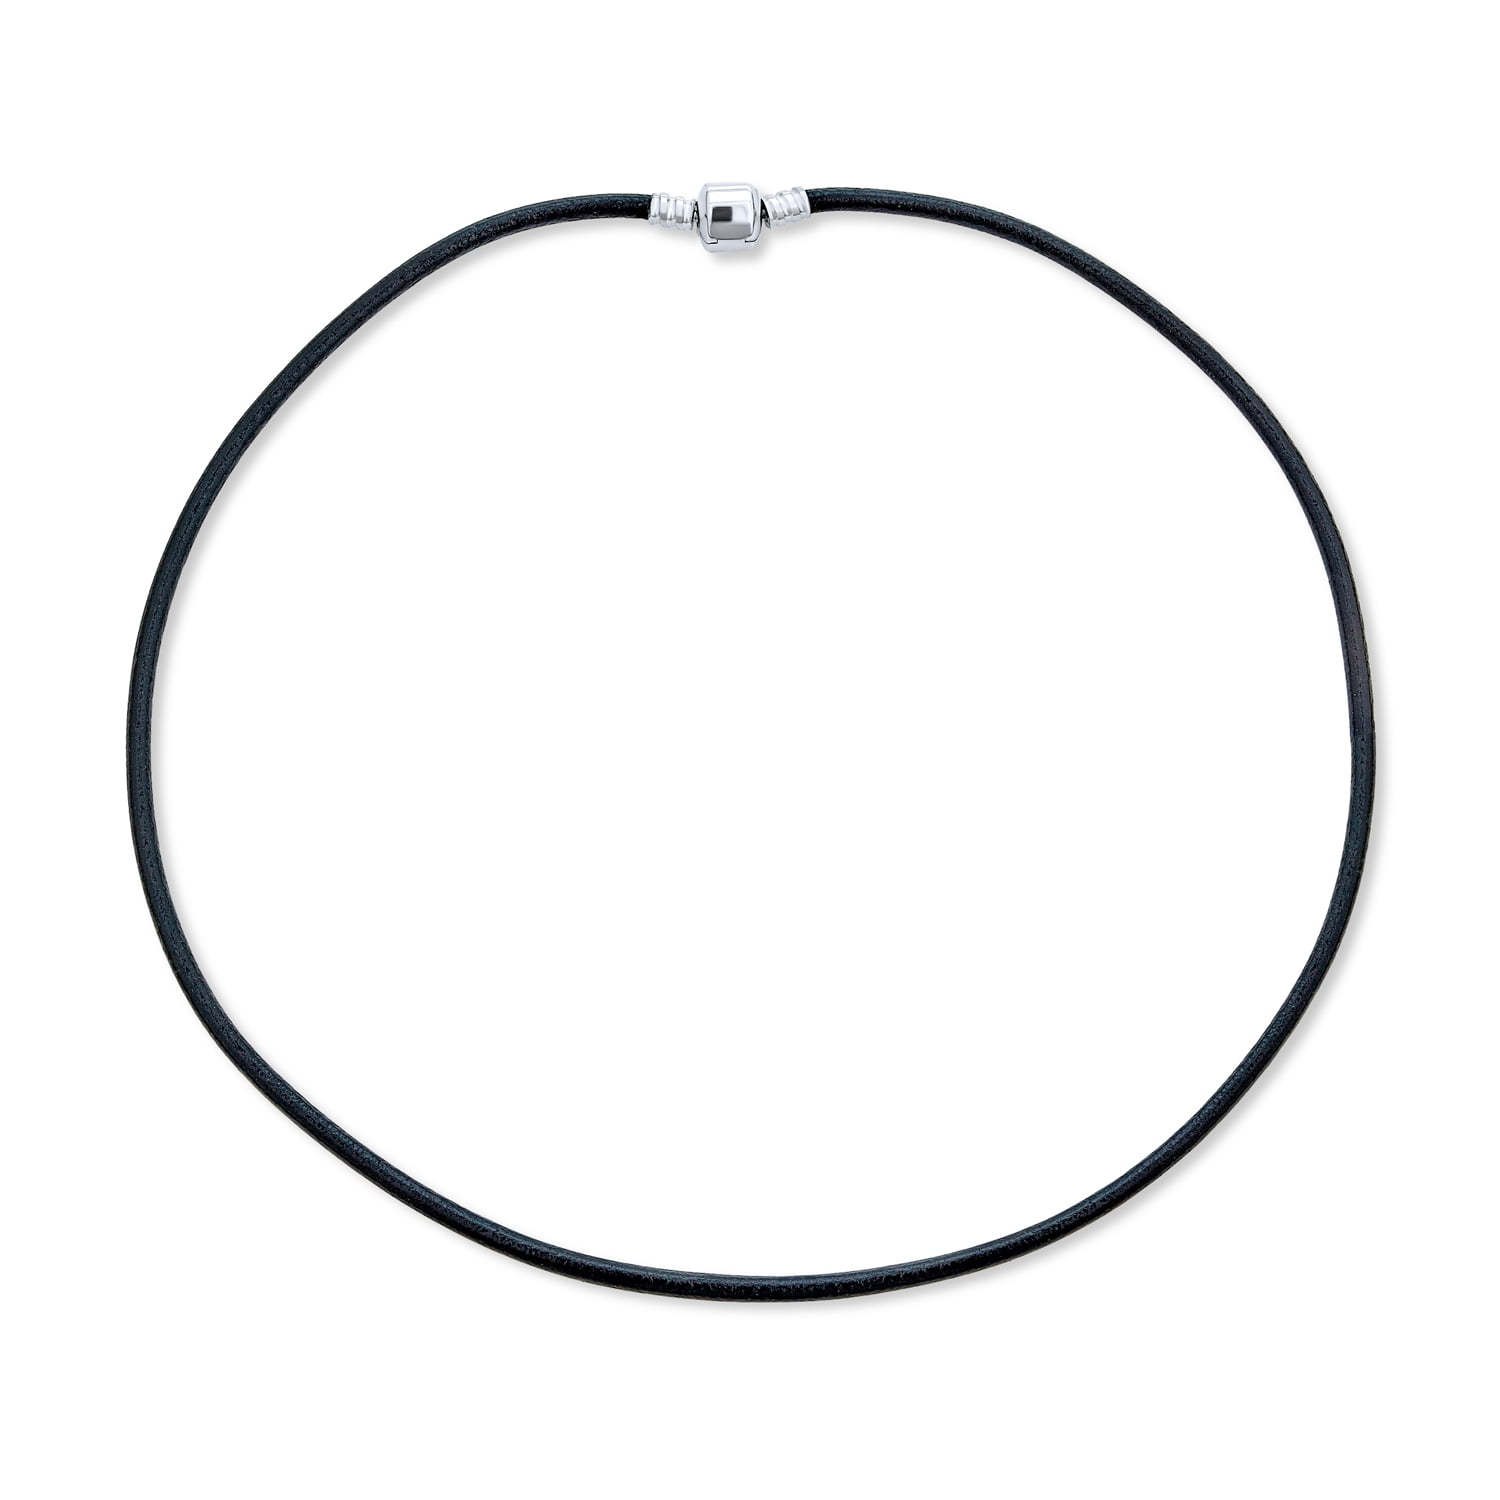 Necklace - 18 inch Black Cord Necklace with Property of Disc